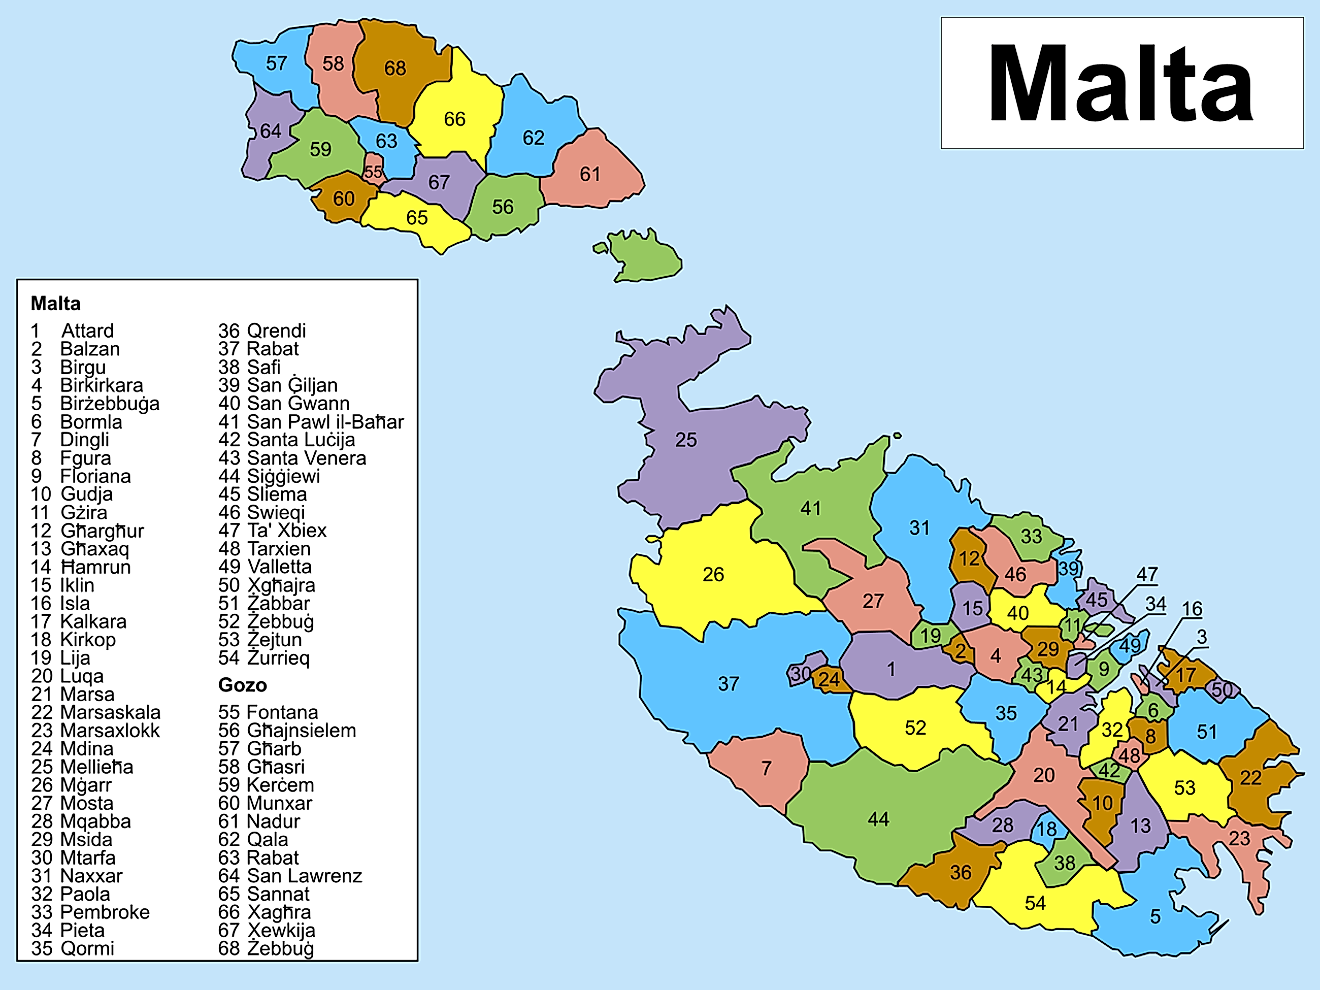 Political Map of Malta showing its 68 localities and the capital city Valletta. Credit: Shazz/Wikimedia.org